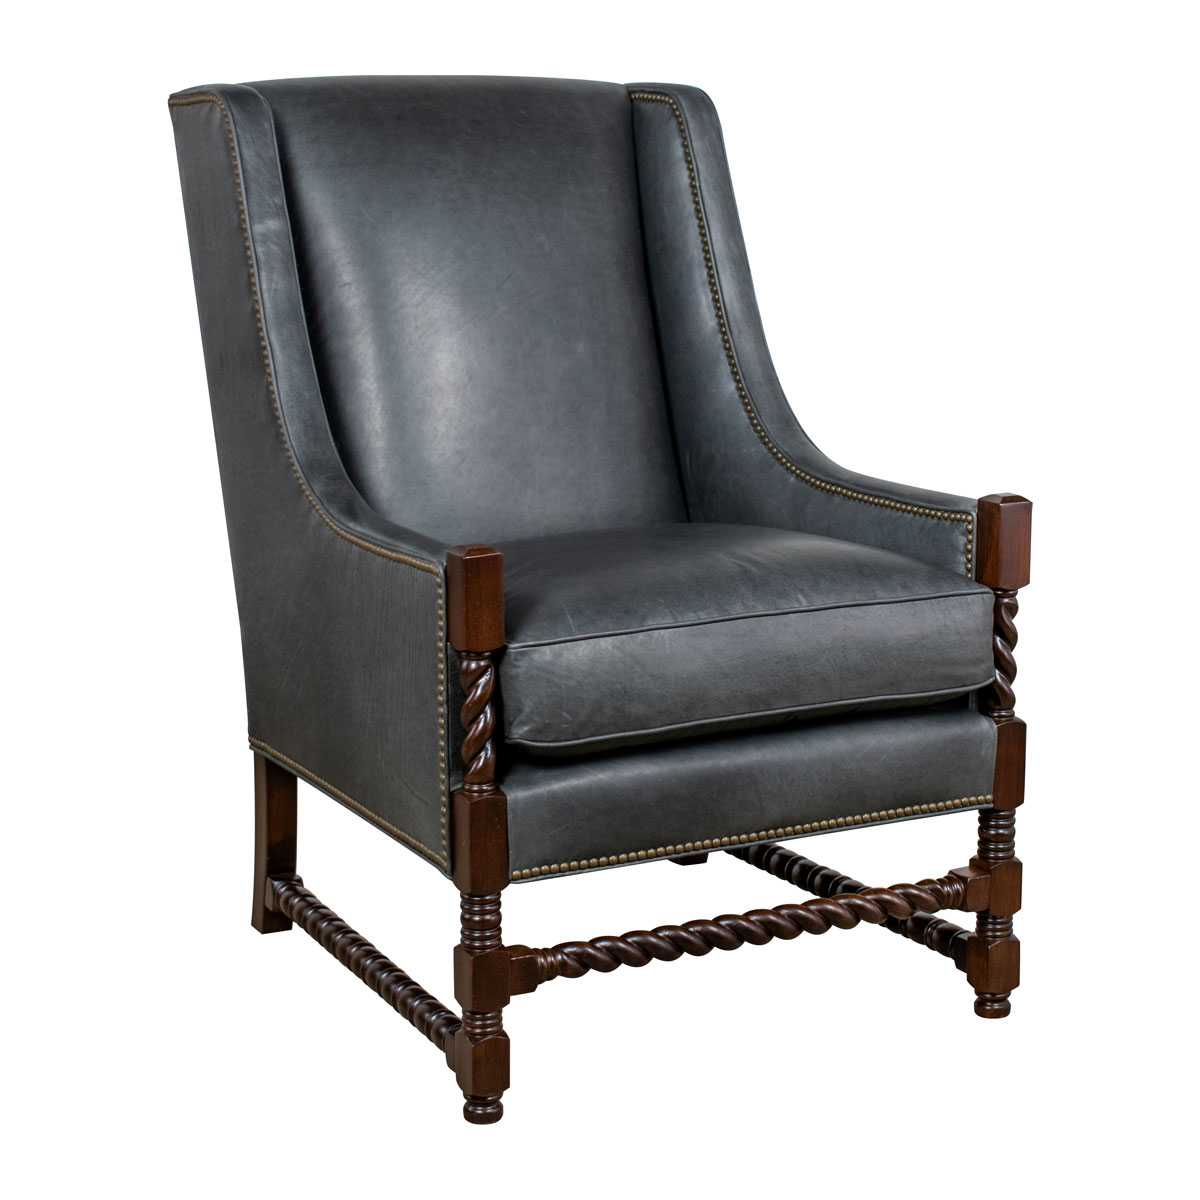 Our House 860 Jacoby Wing Chair